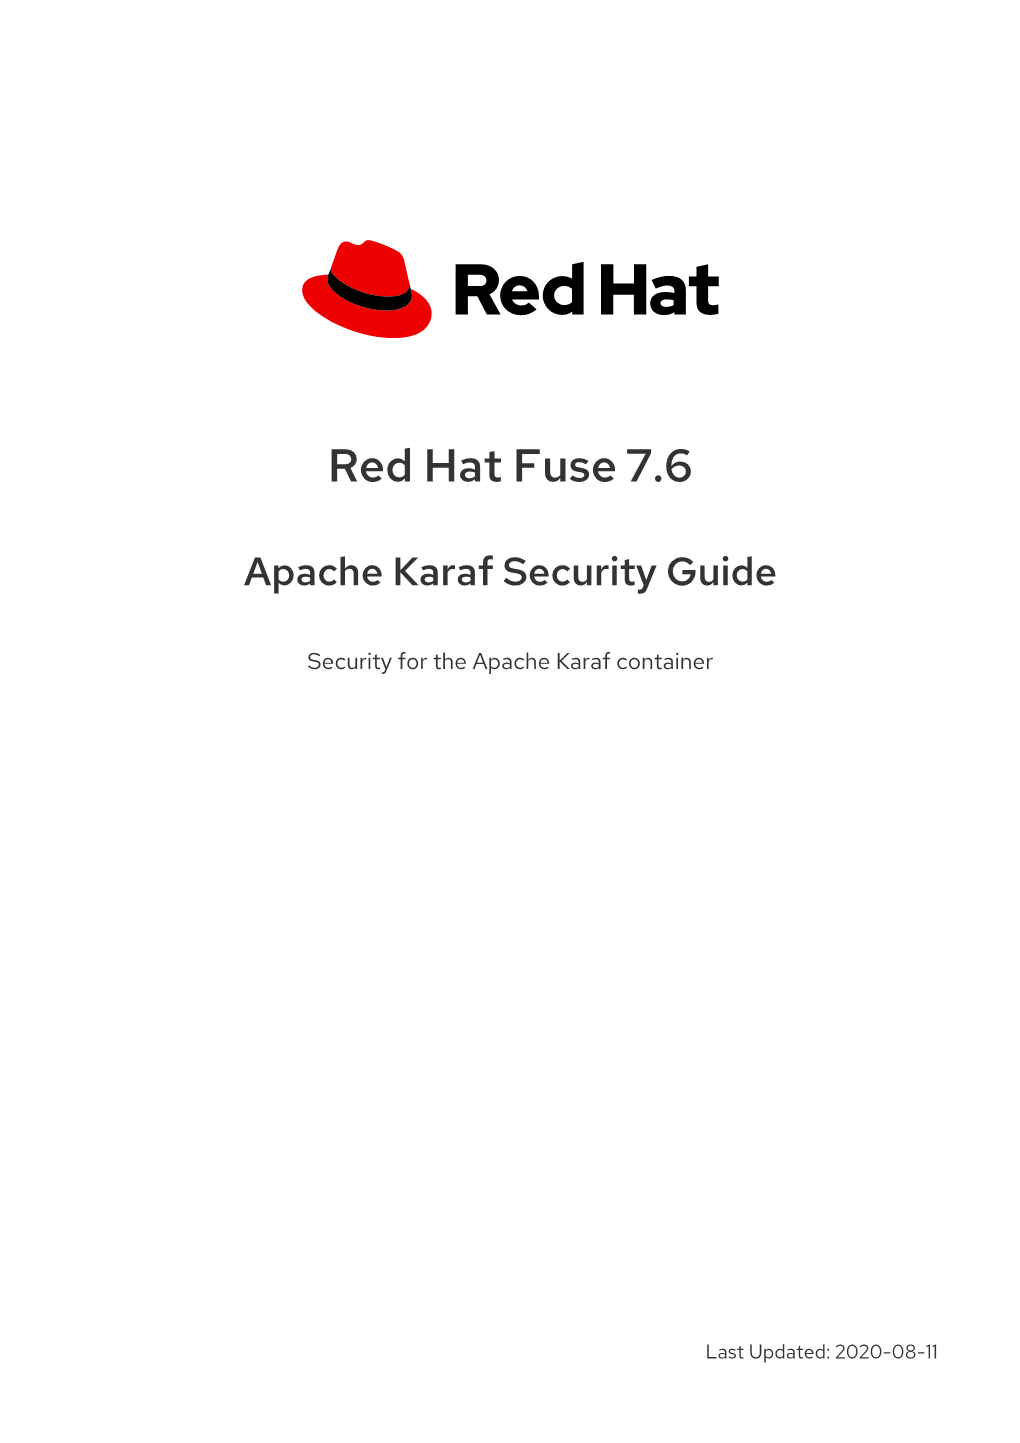 Red Hat Fuse 7.6 Apache Karaf Security Guide